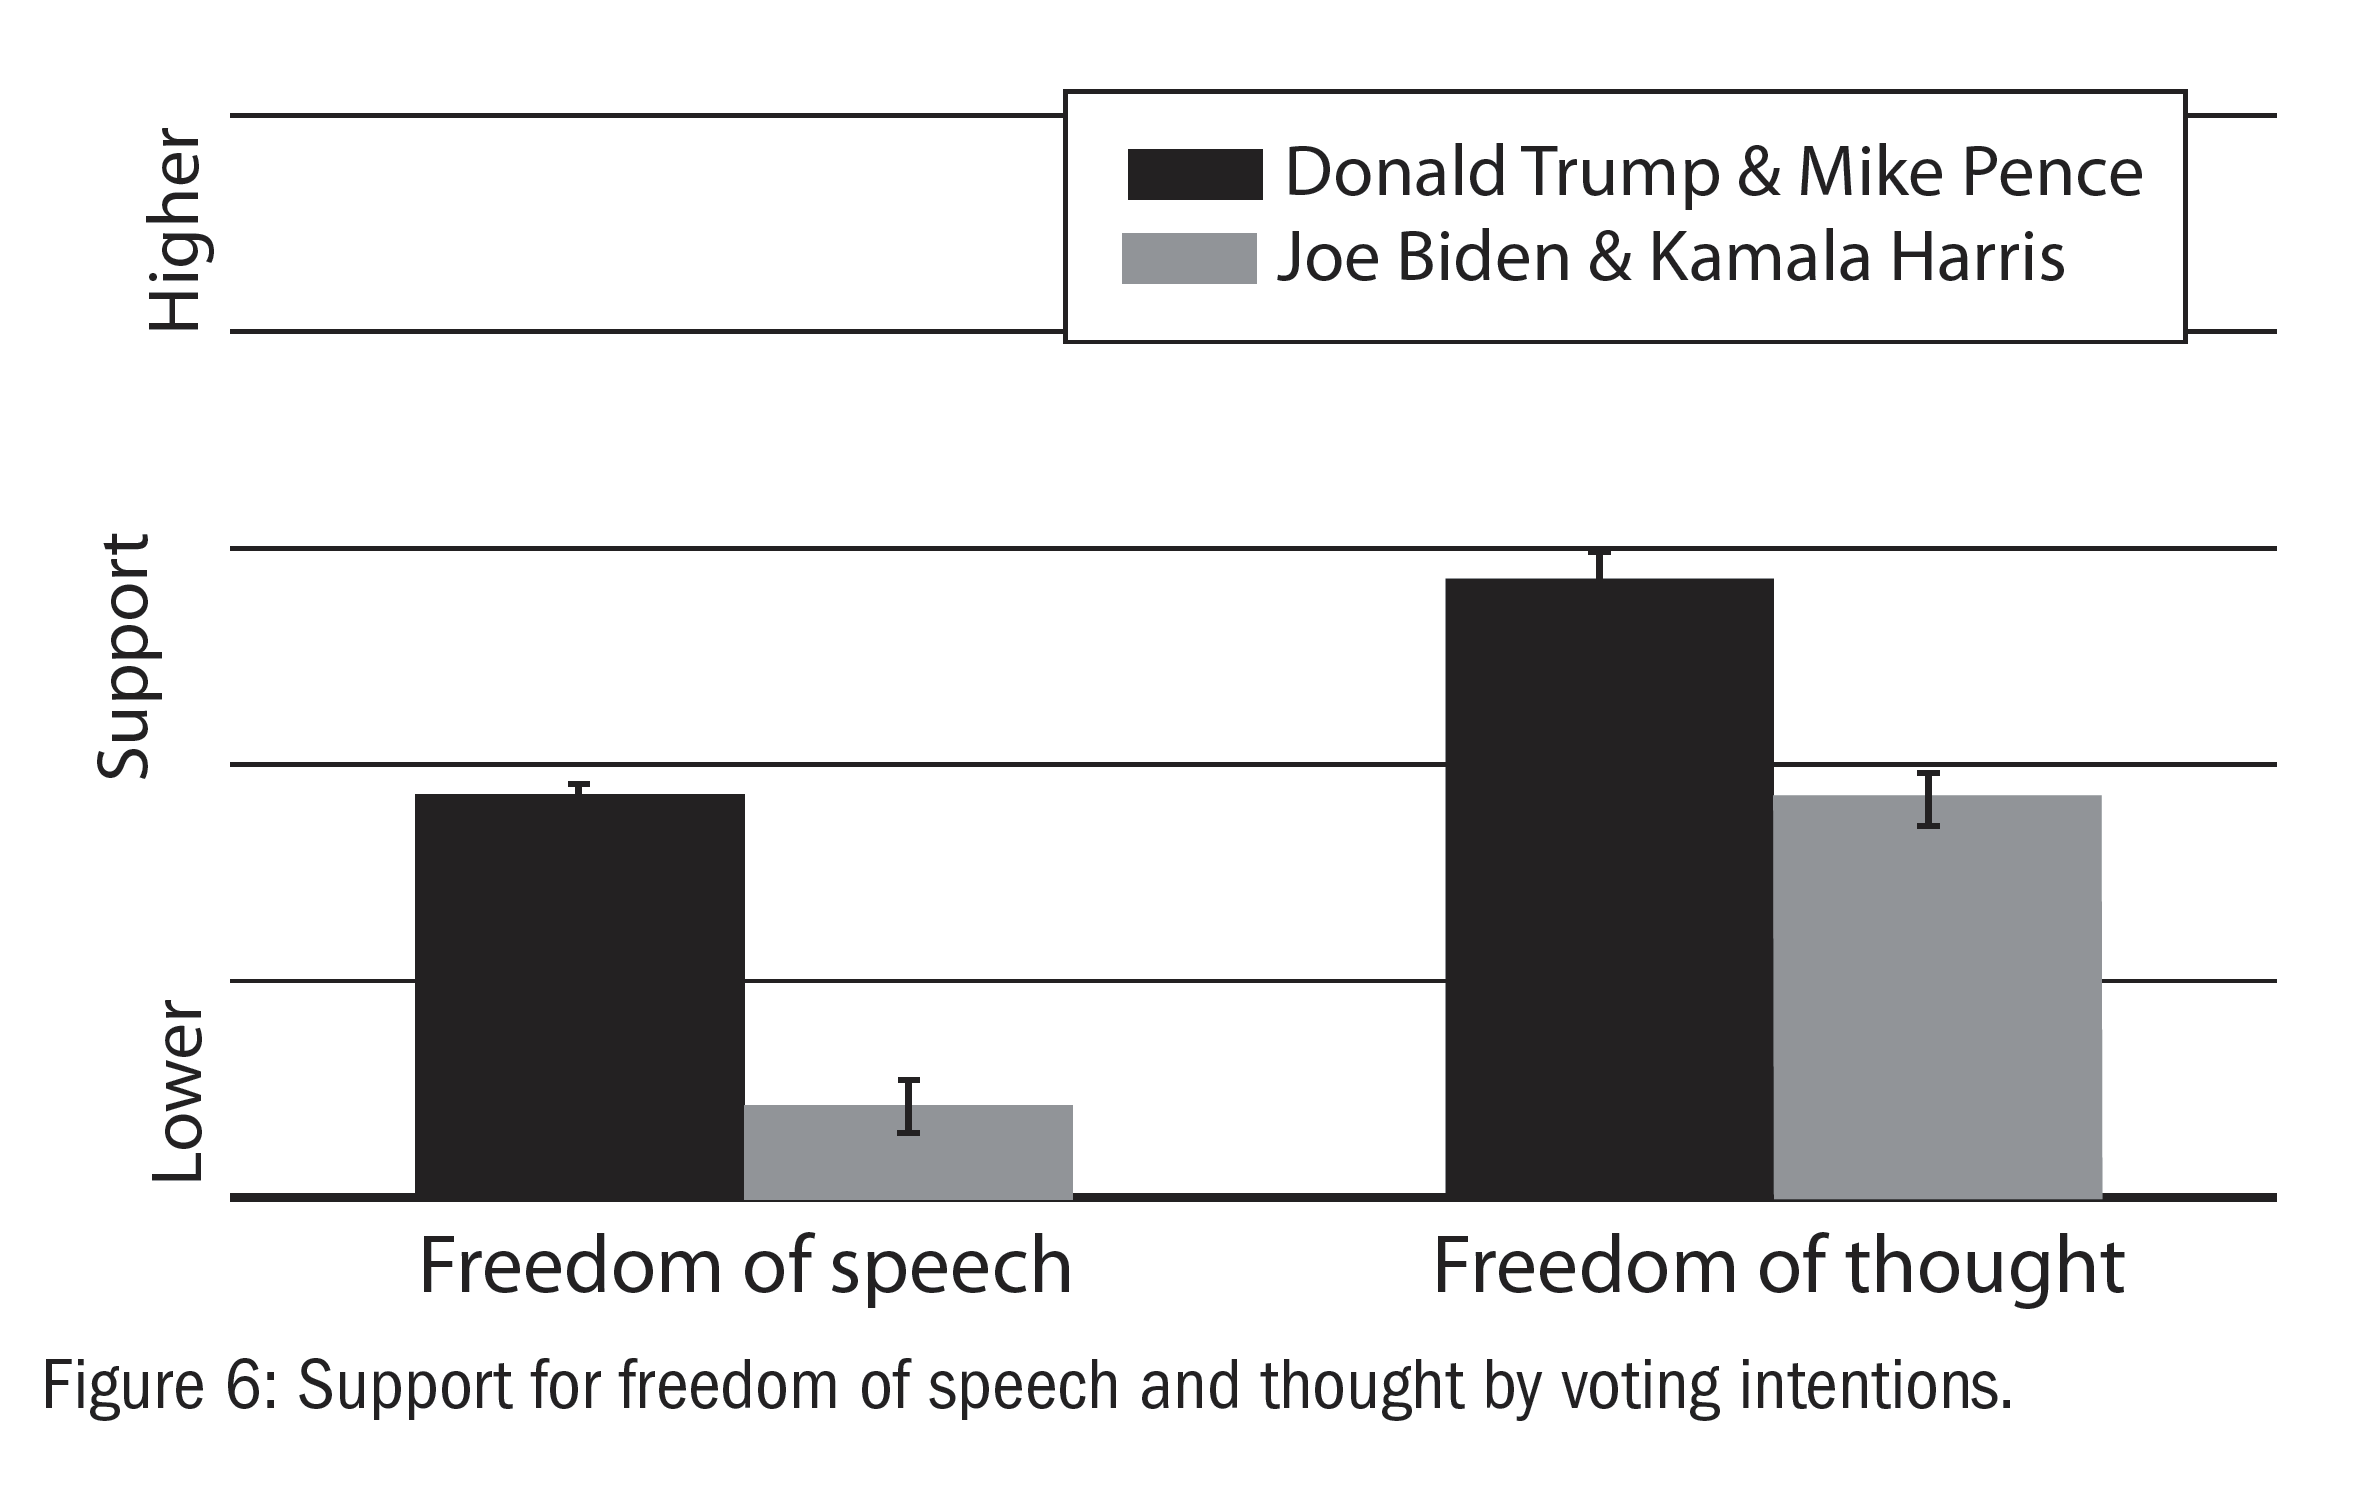 Figure 6: Support for freedom of speech and thought by voting intentions